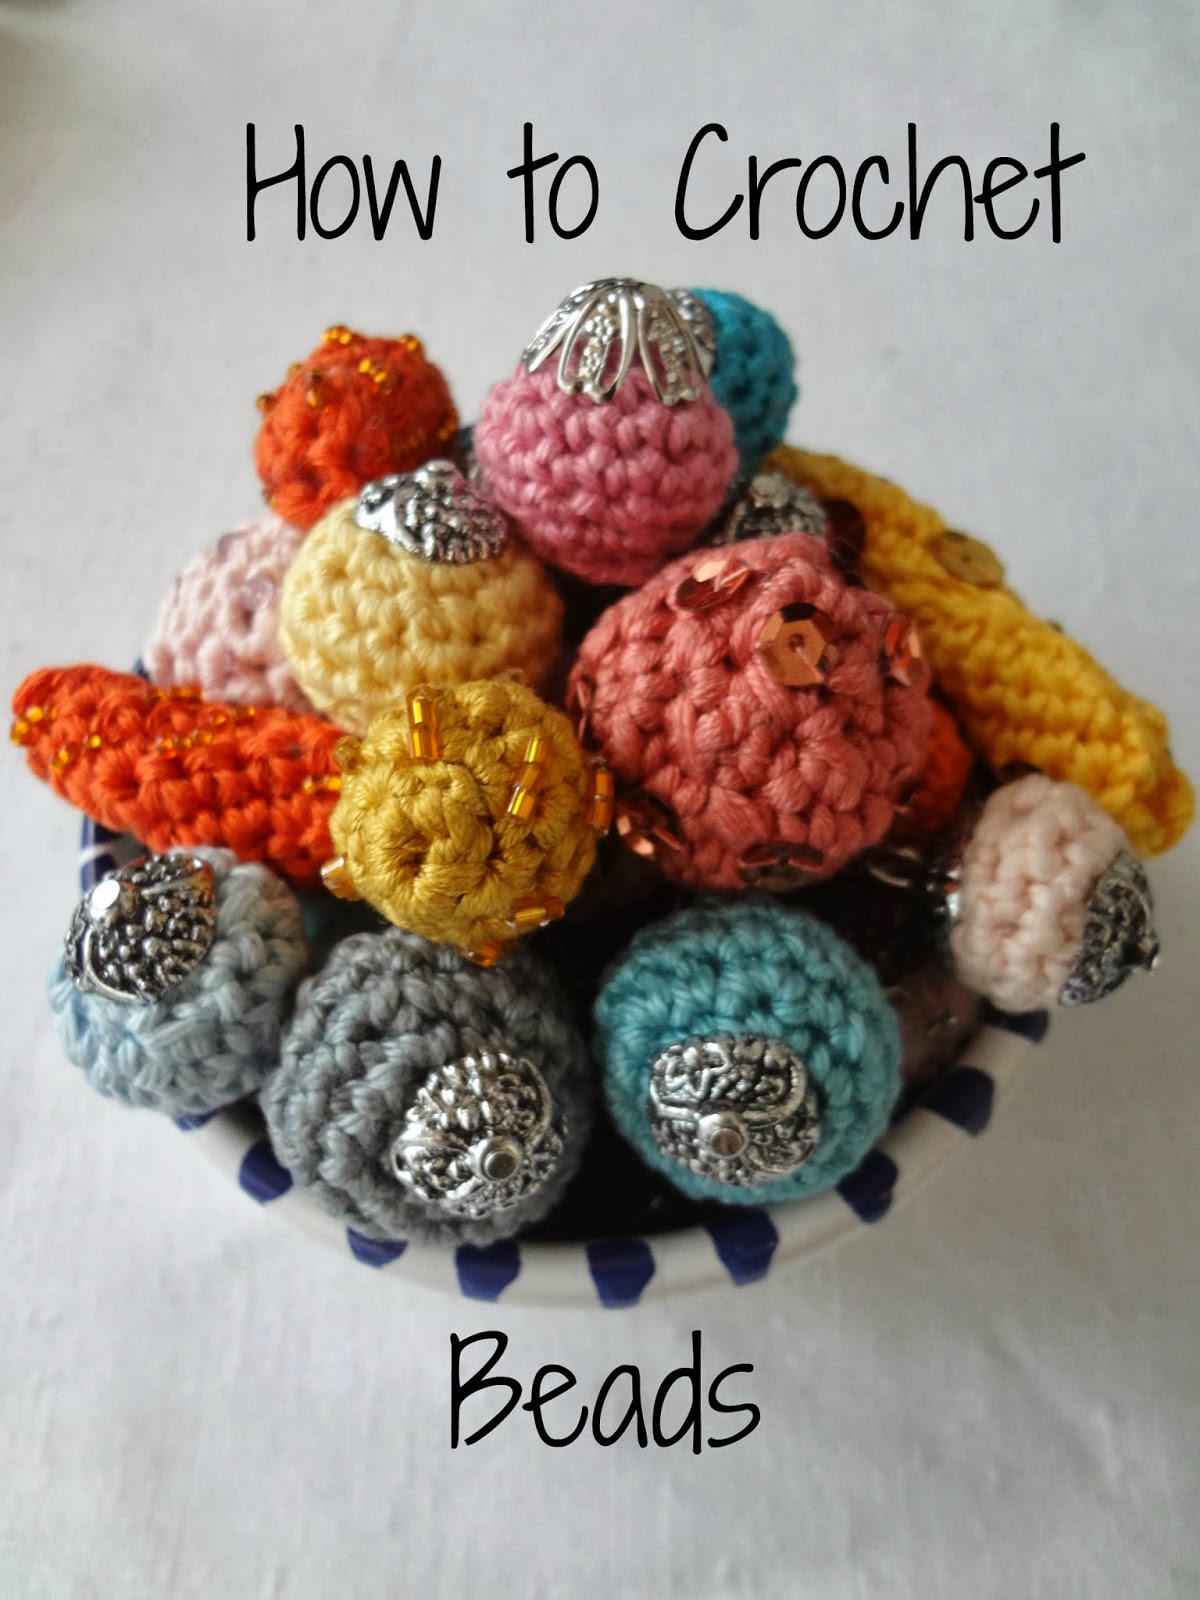 Little Treasures: How To Crochet Beads - A PDF Pattern